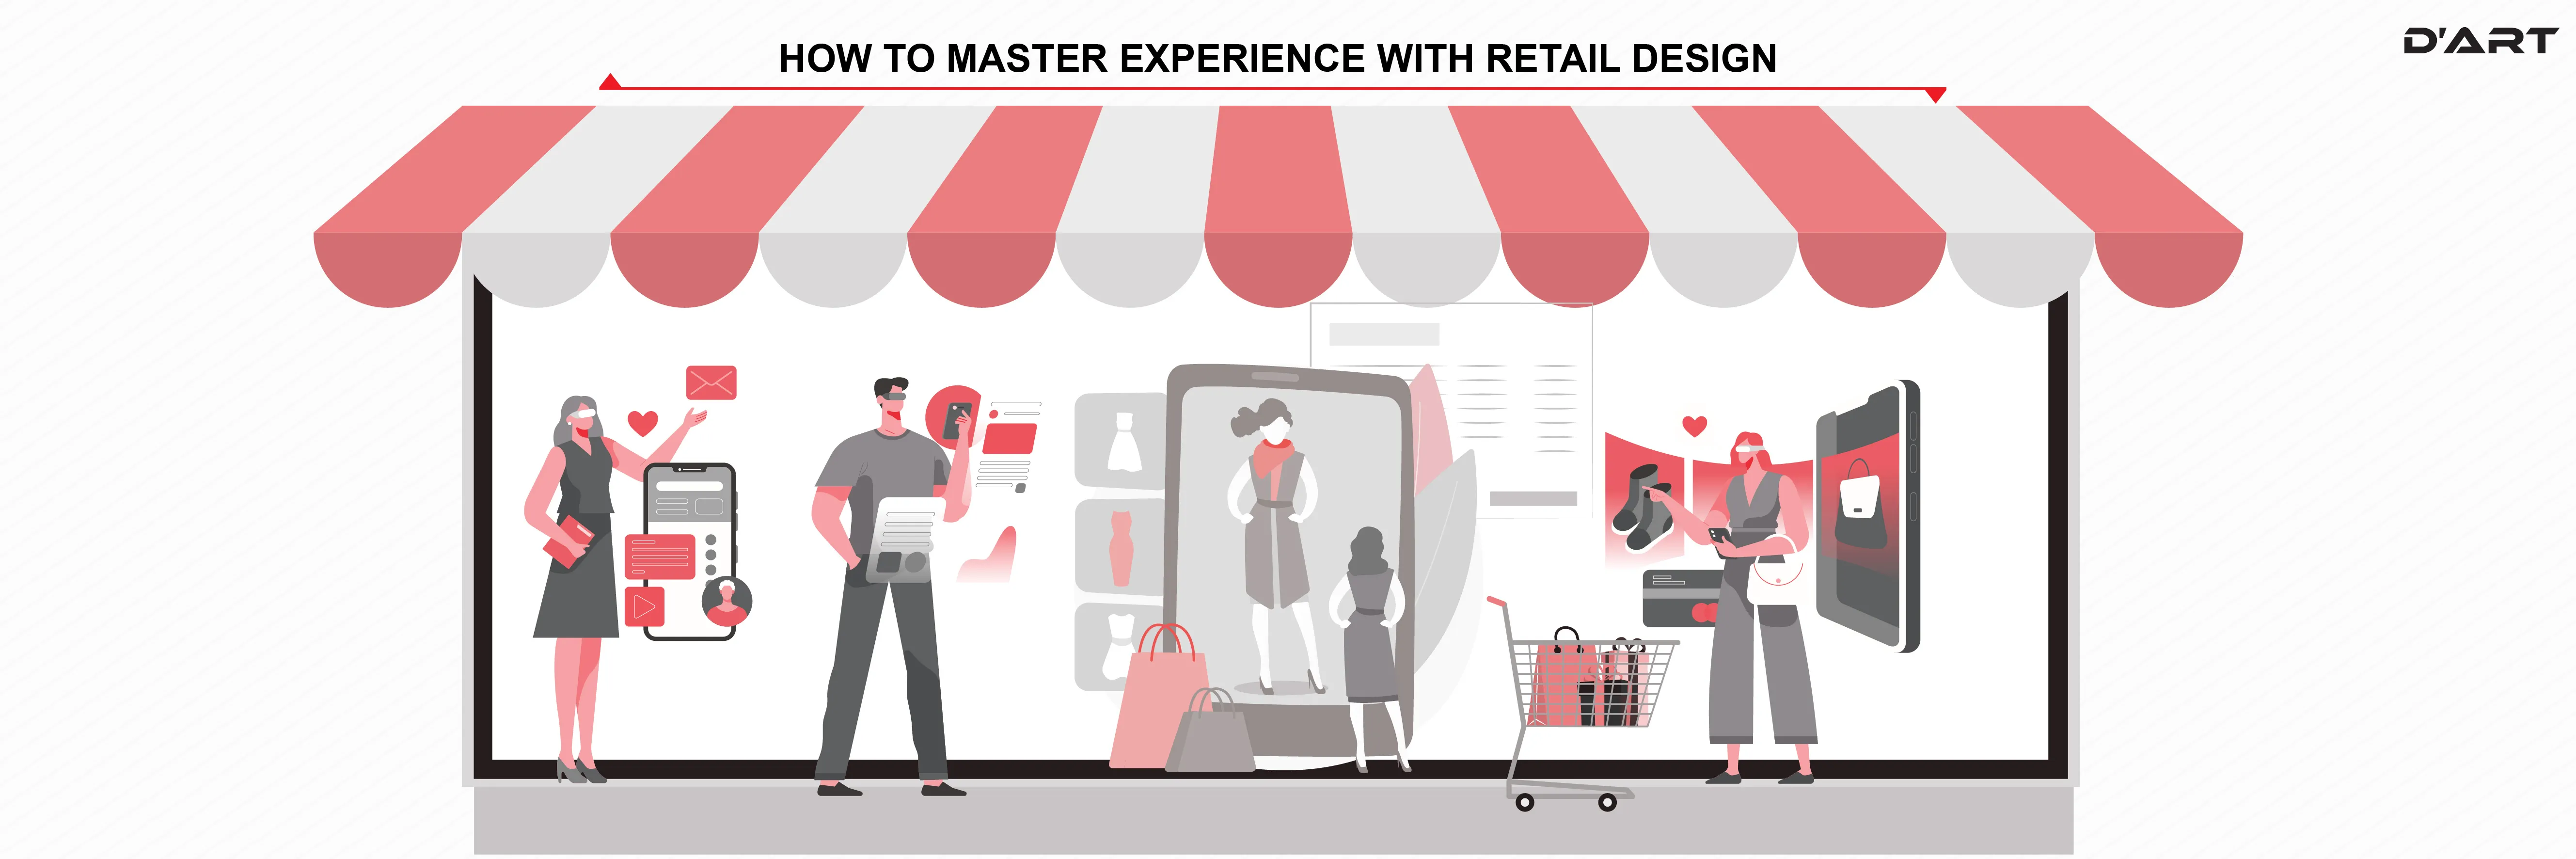 HOW TO MASTER EXPERIENCE WITH RETAIL DESIGN